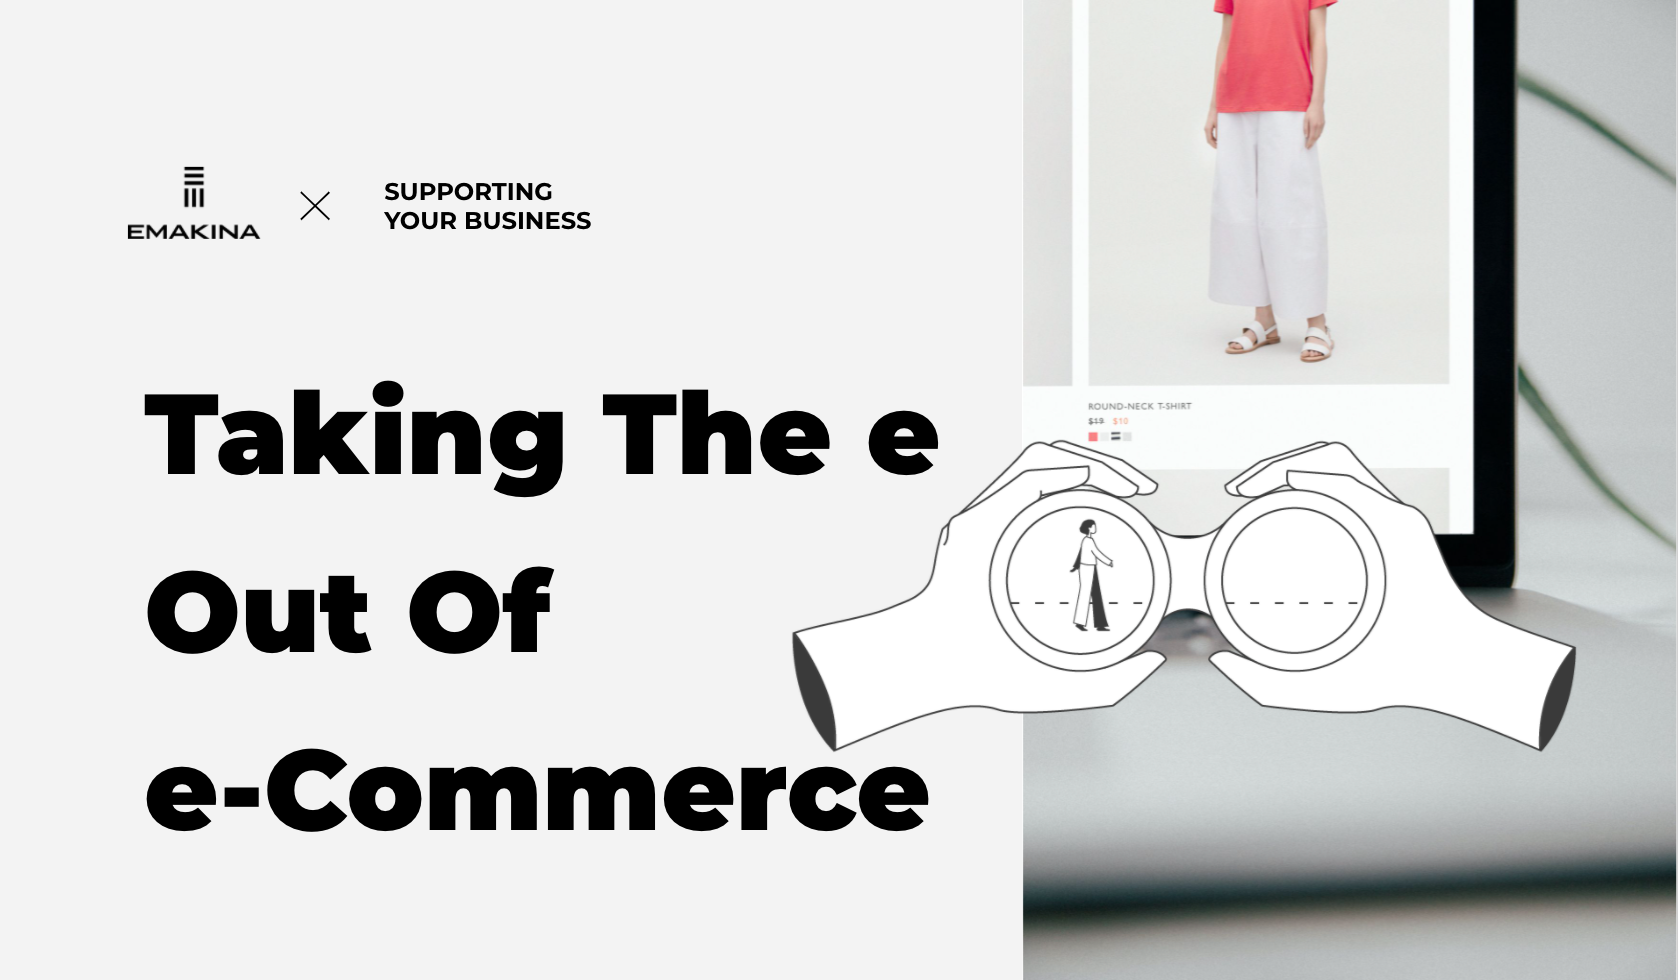 Taking The e Out of e-Commerce